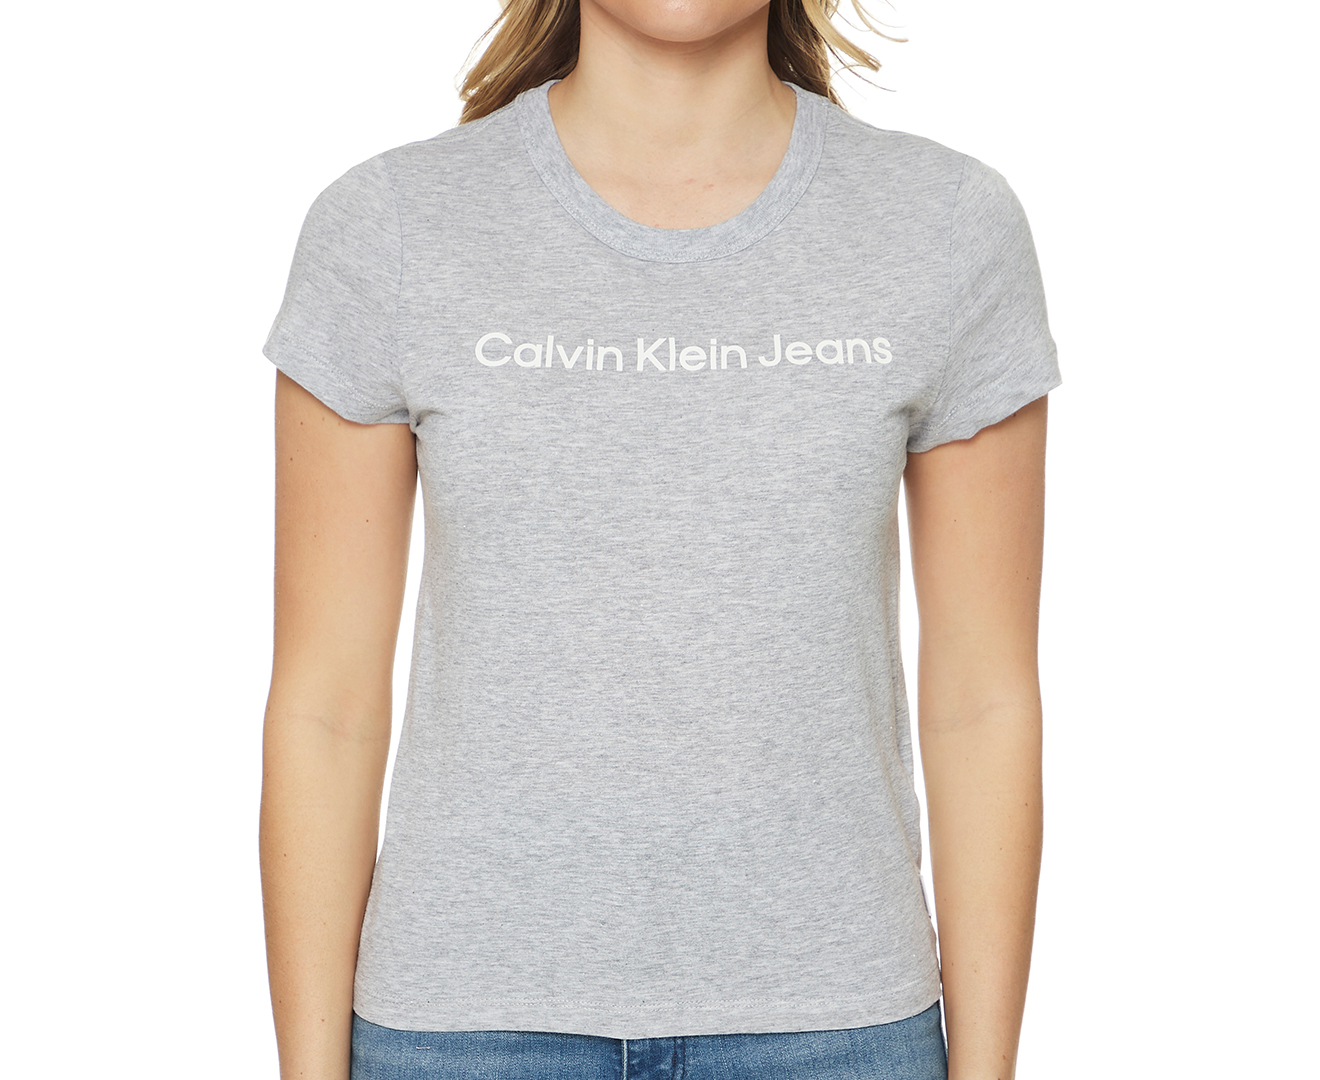 CALVIN KLEIN JEANS - Women's T-shirt with nuanced logo - Size - GH